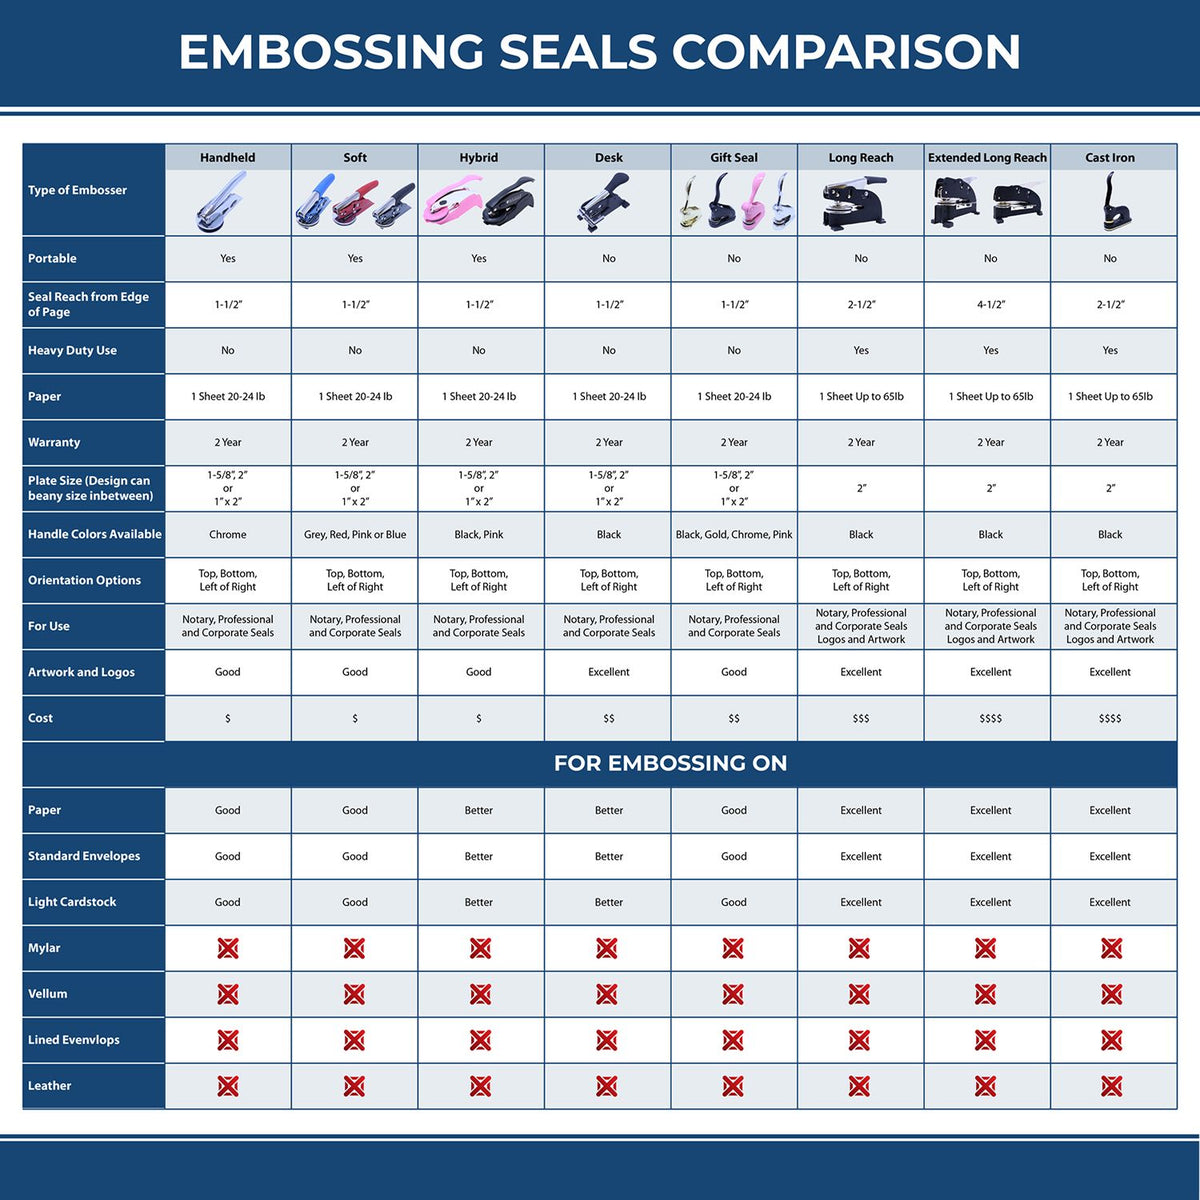 A comparison chart for the different types of mount models available for the Soft Pocket Washington Landscape Architect Embosser.